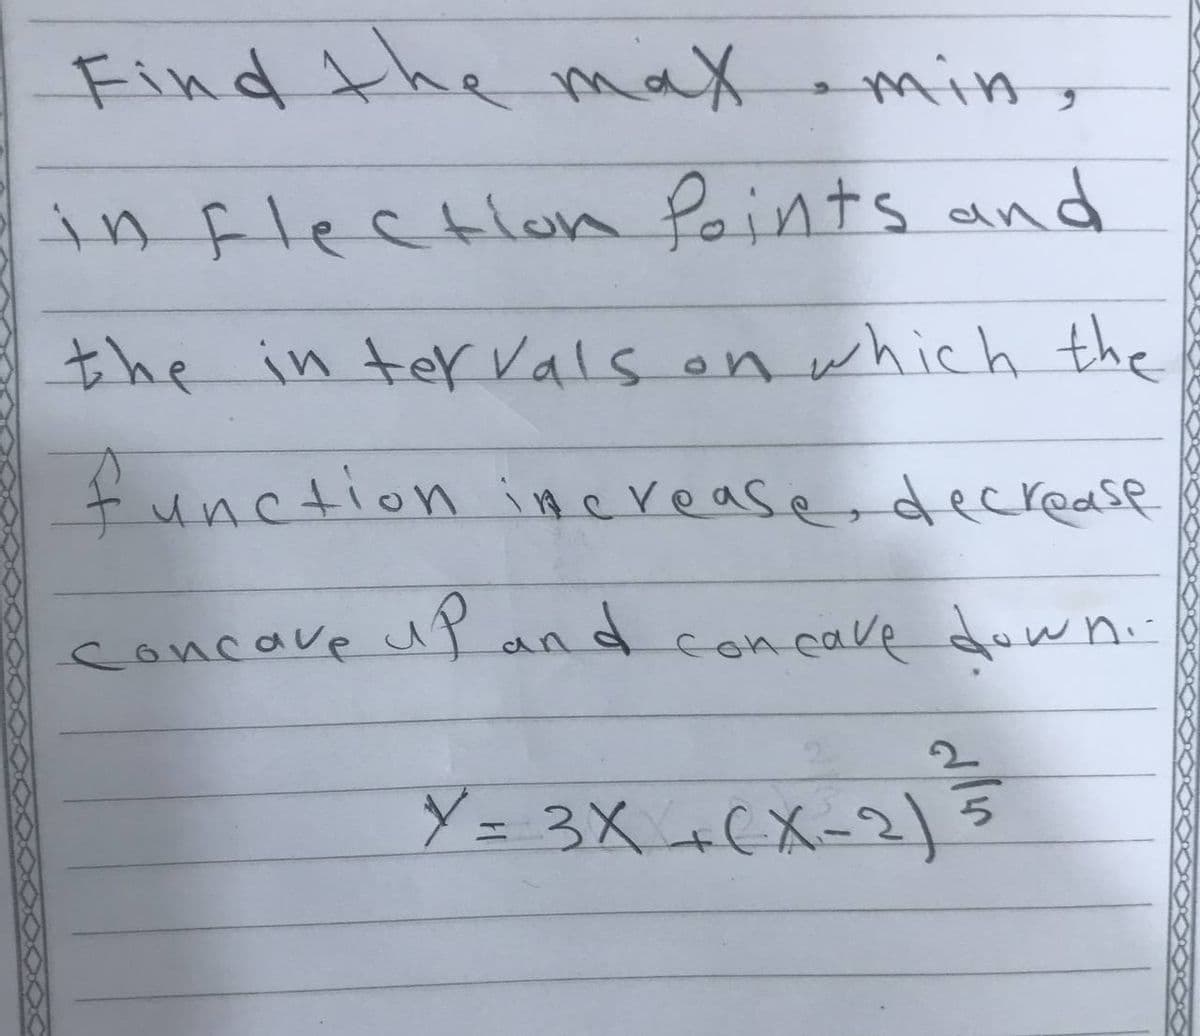 Find the max amin ,
in flection Points and
the in ter Vals on which the
function iHerease, decrease
concave up and concave dow ni
i-
Y = 3X +(X-2)
